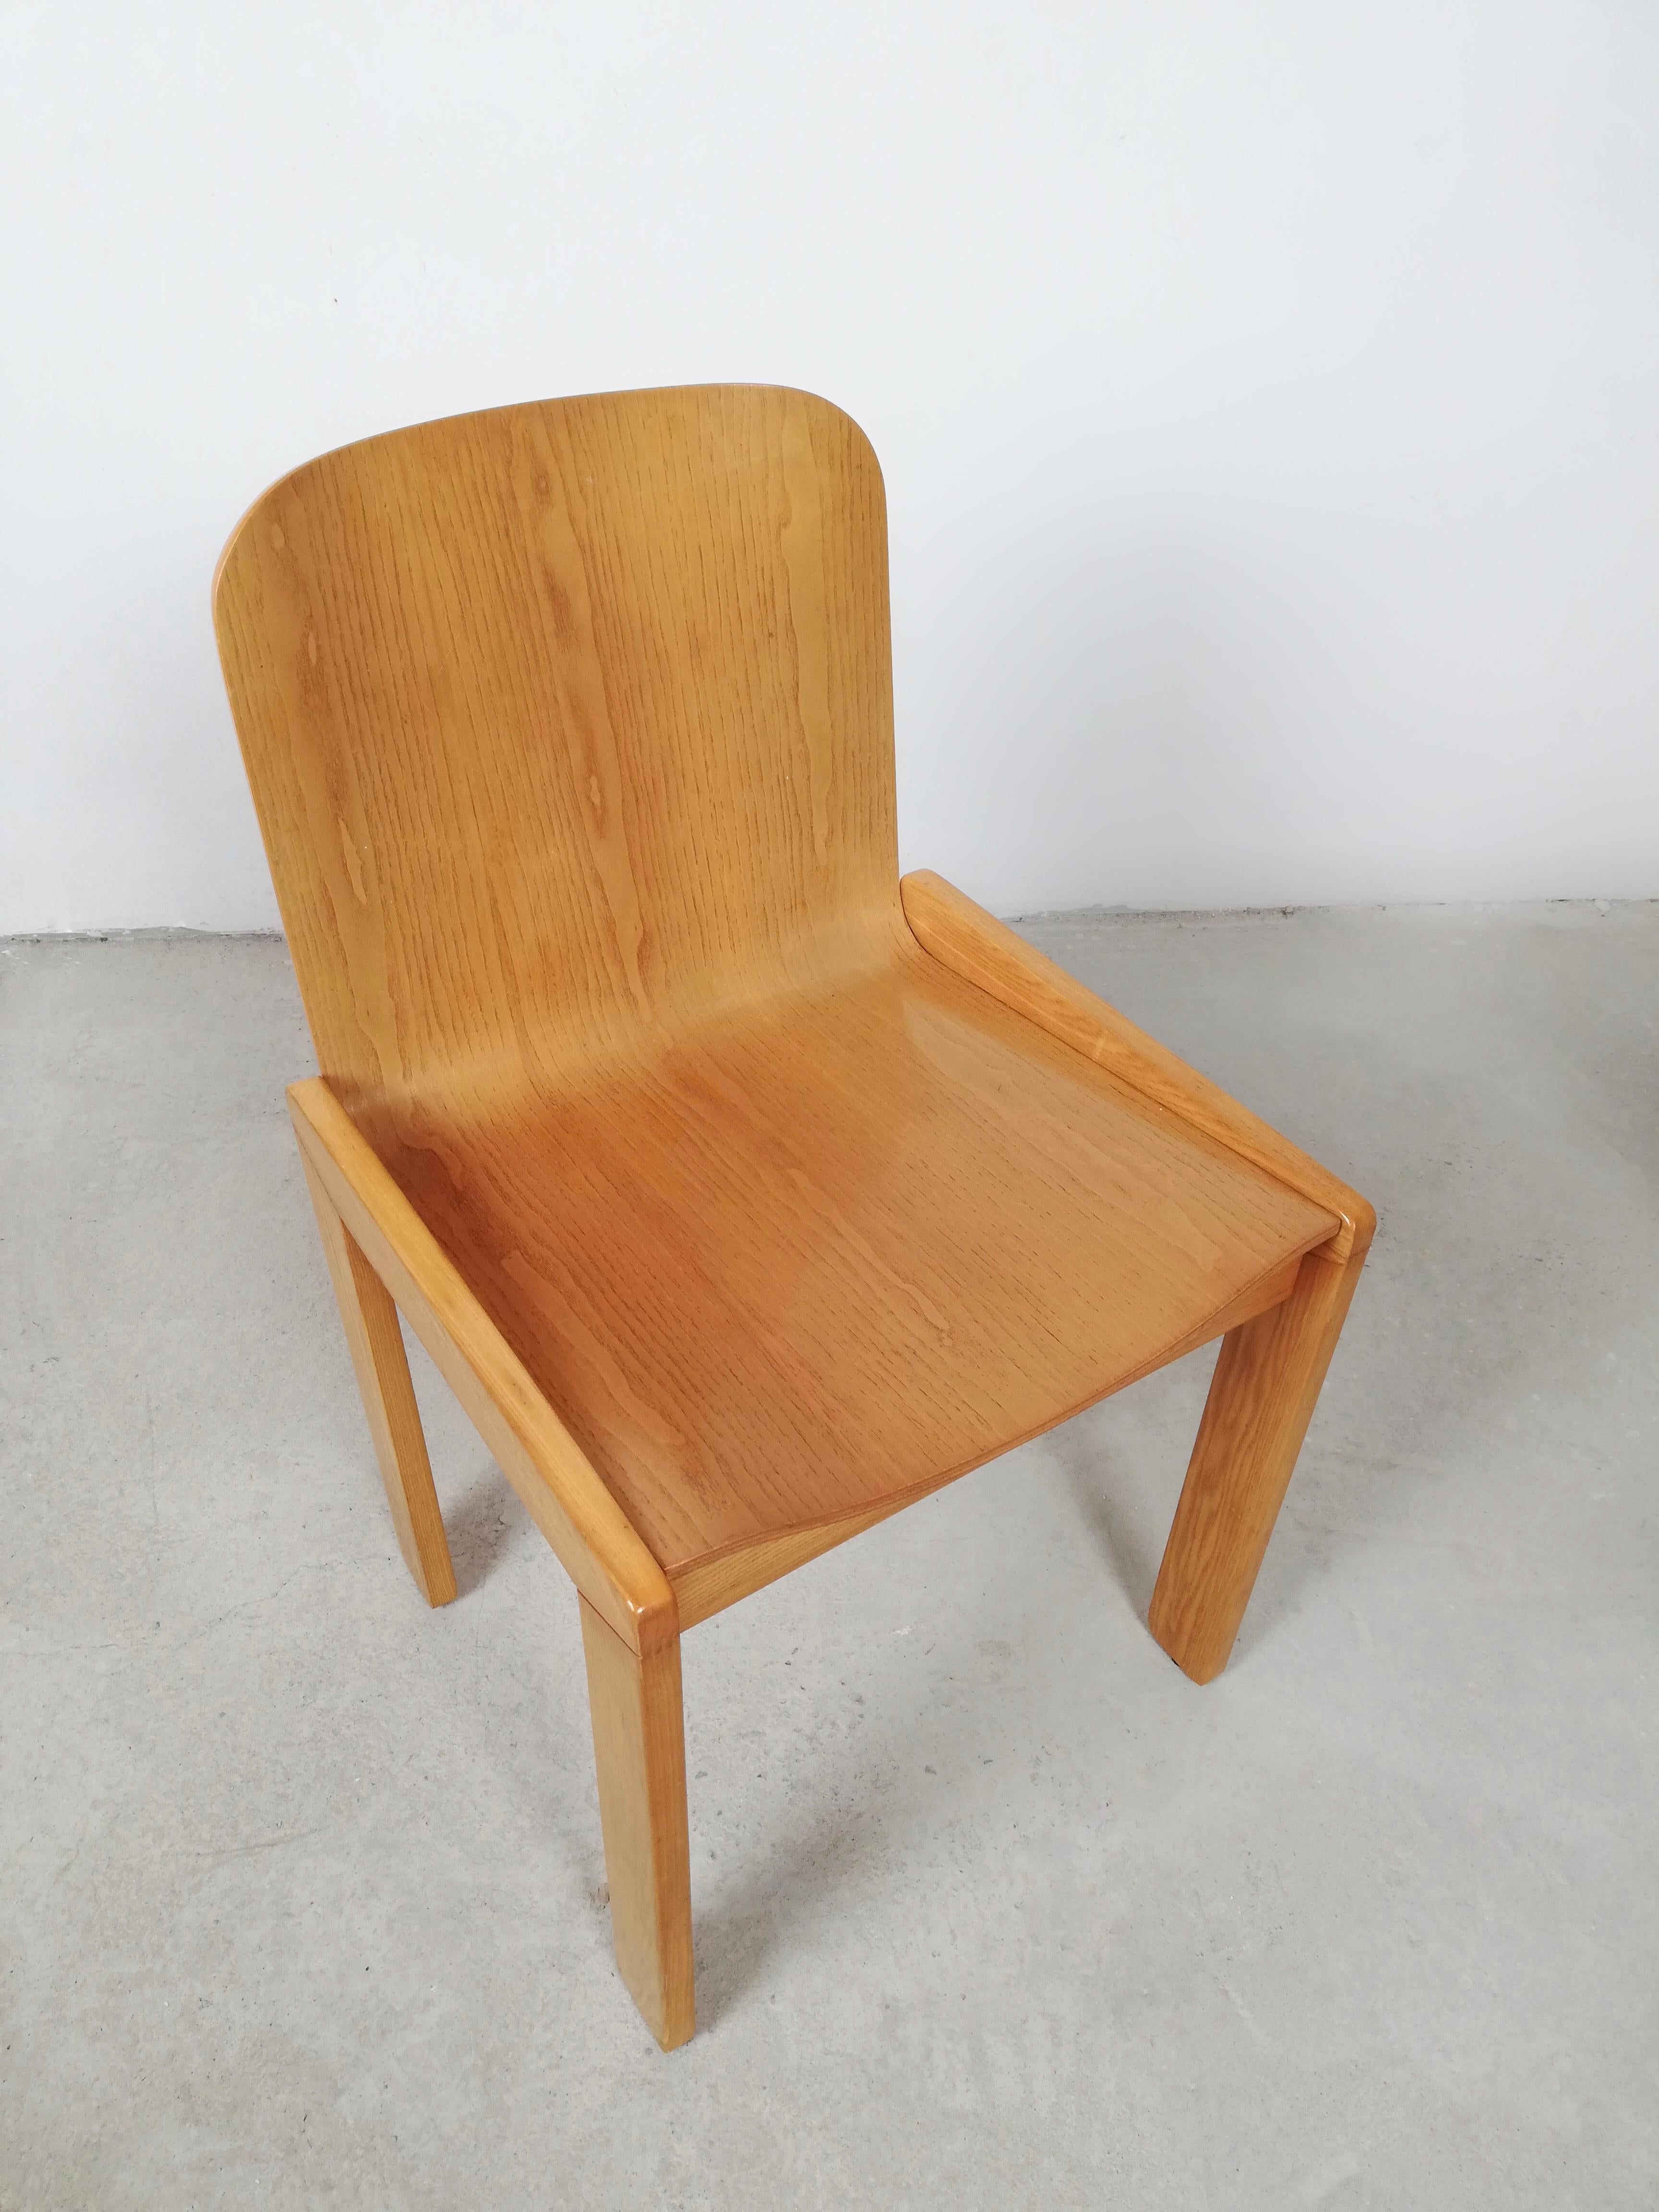 6 Curved Plywood Dining Chairs by Molteni in the style of Scarpa, Italy, 1970s For Sale 9